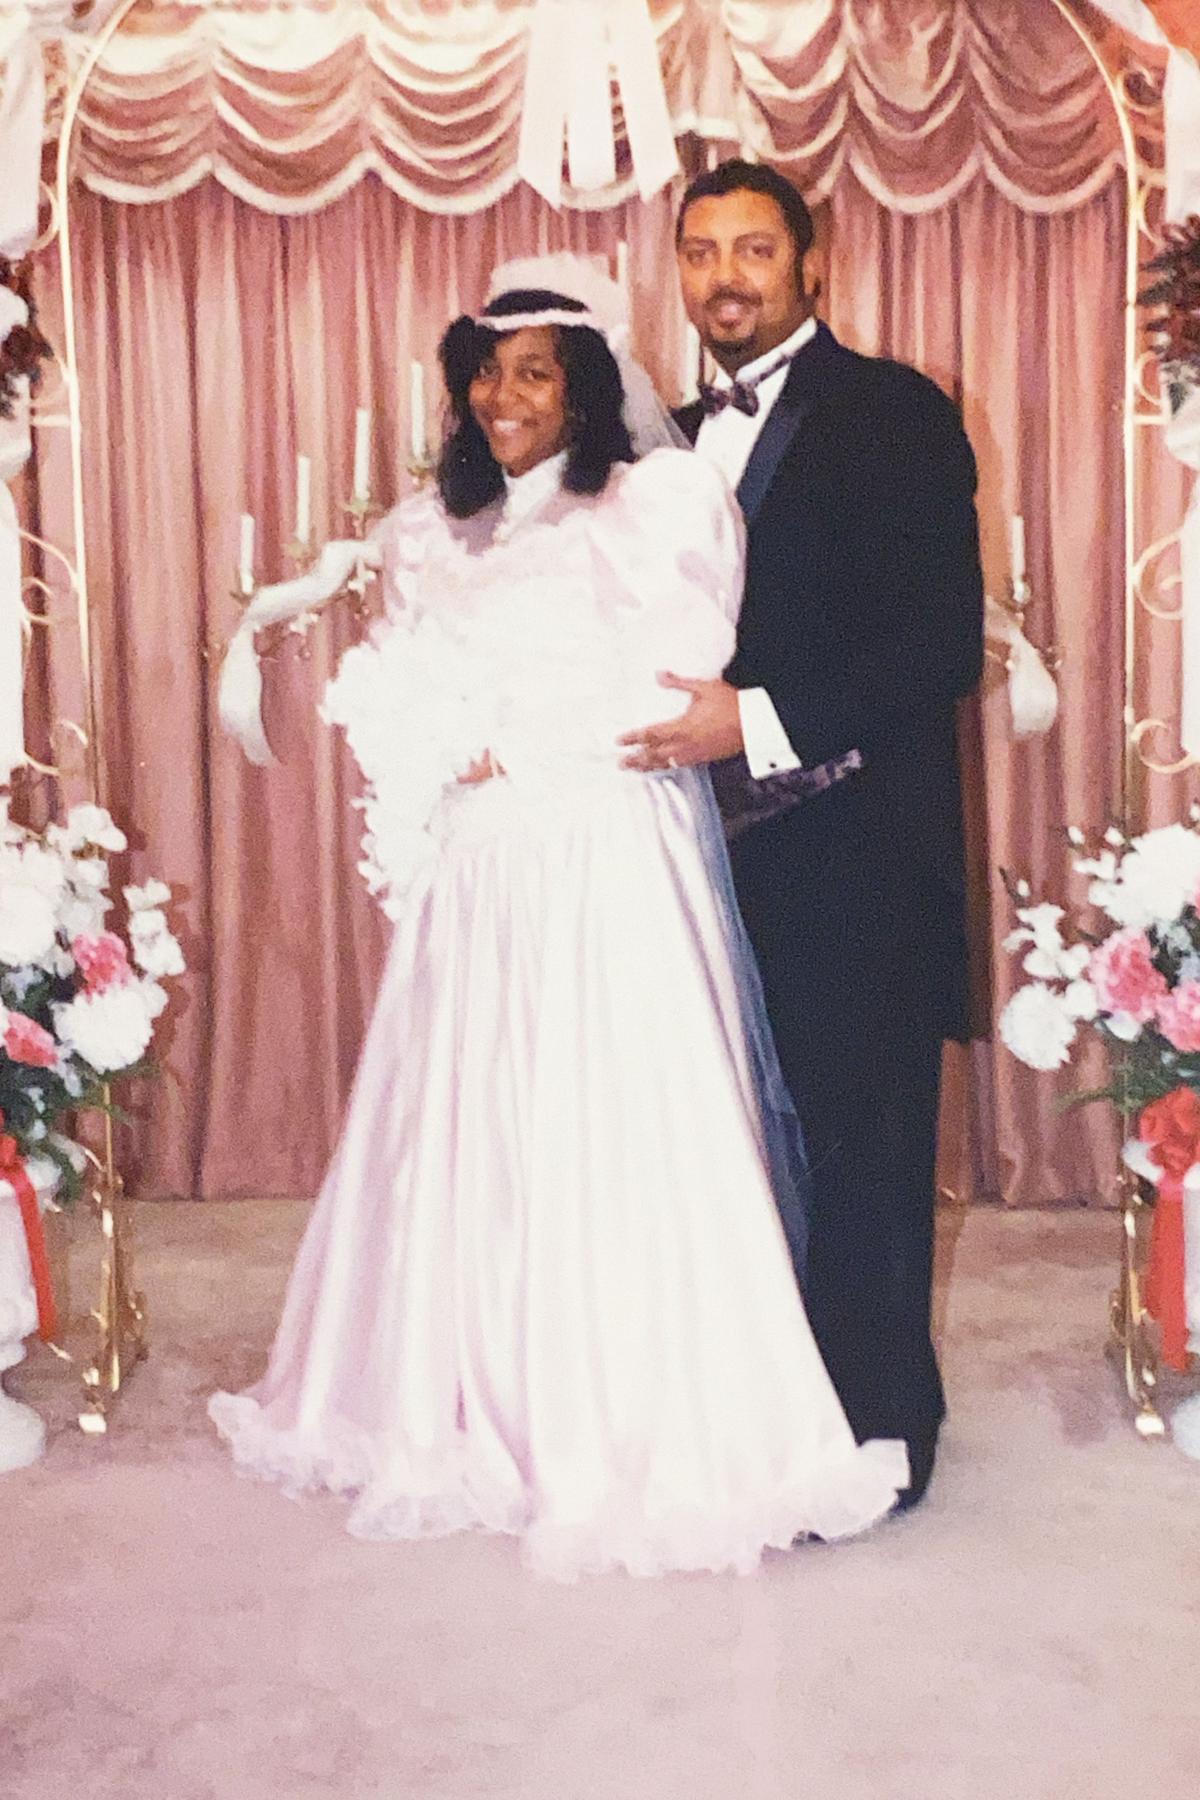 The Robinsons, who were married 35 years. (Courtesy of Delon Adams)